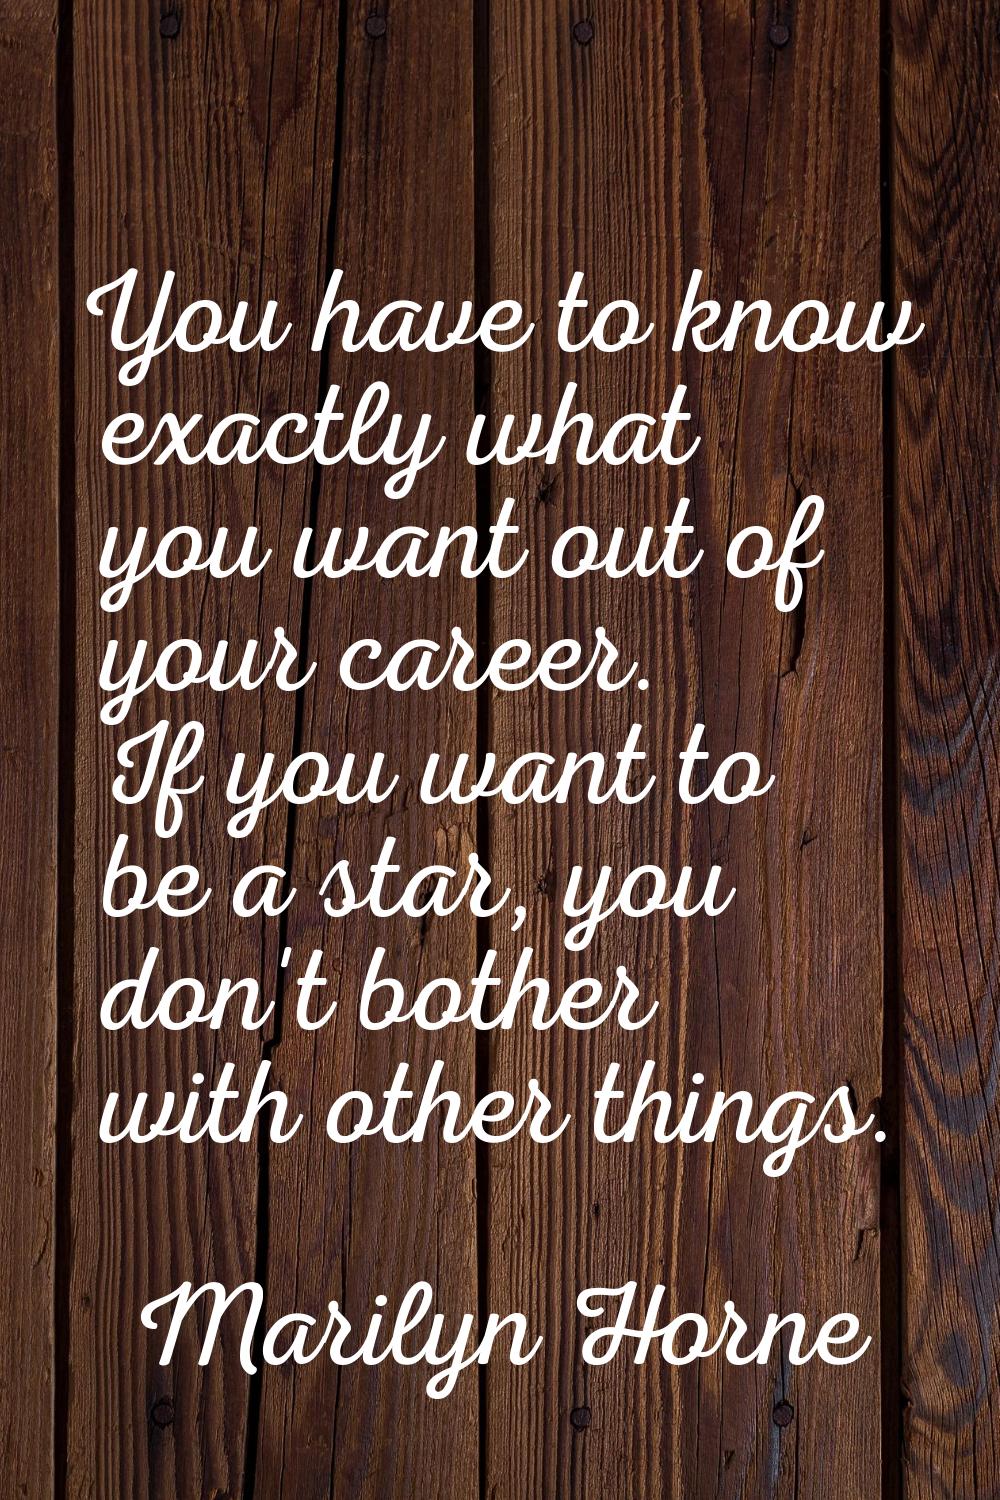 You have to know exactly what you want out of your career. If you want to be a star, you don't both